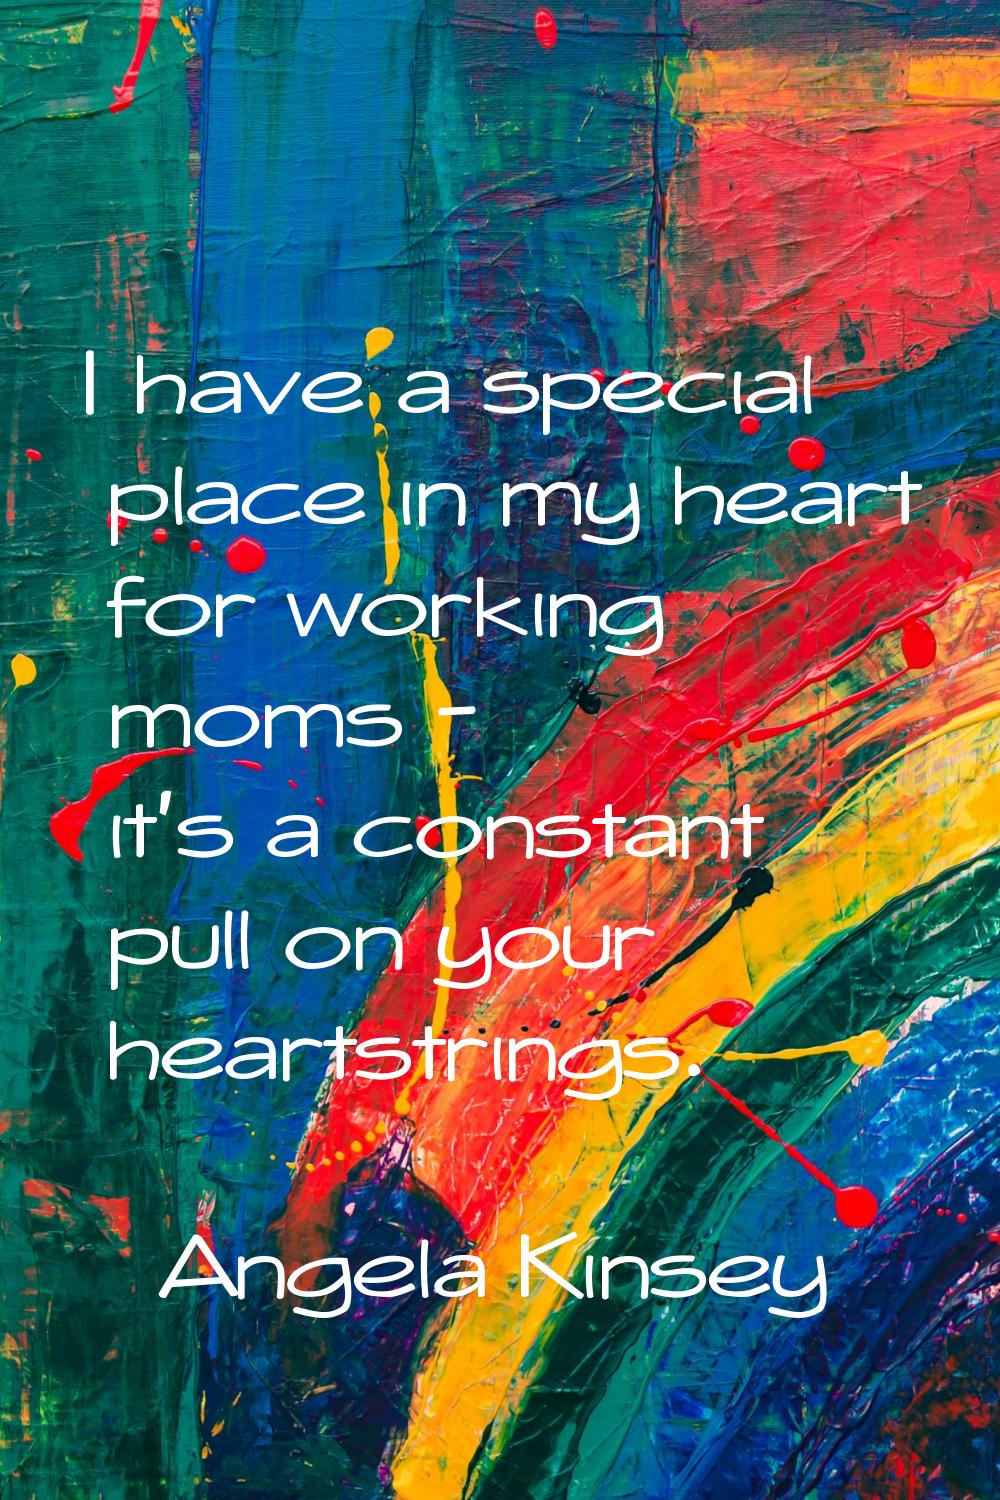 I have a special place in my heart for working moms - it's a constant pull on your heartstrings.